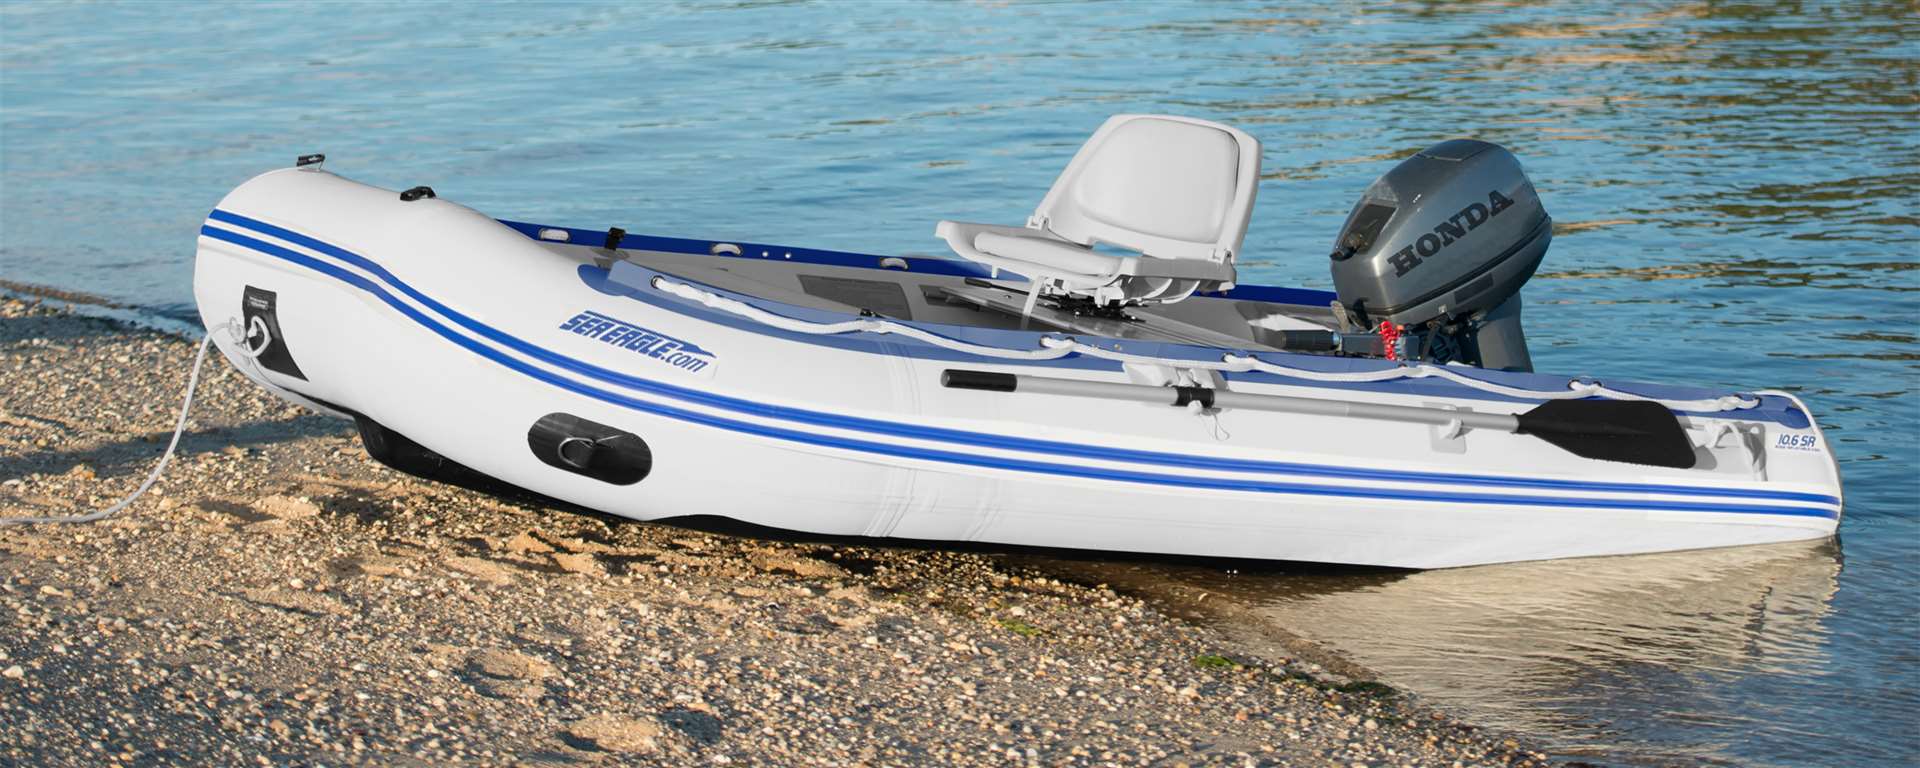 SeaEagle Transom Boat Packages Sea Eagle - 106SR 5 Person 10'6" White/Blue Sport Runabout Inflatable DSFloor Deluxe Boat ( 106SRXX )